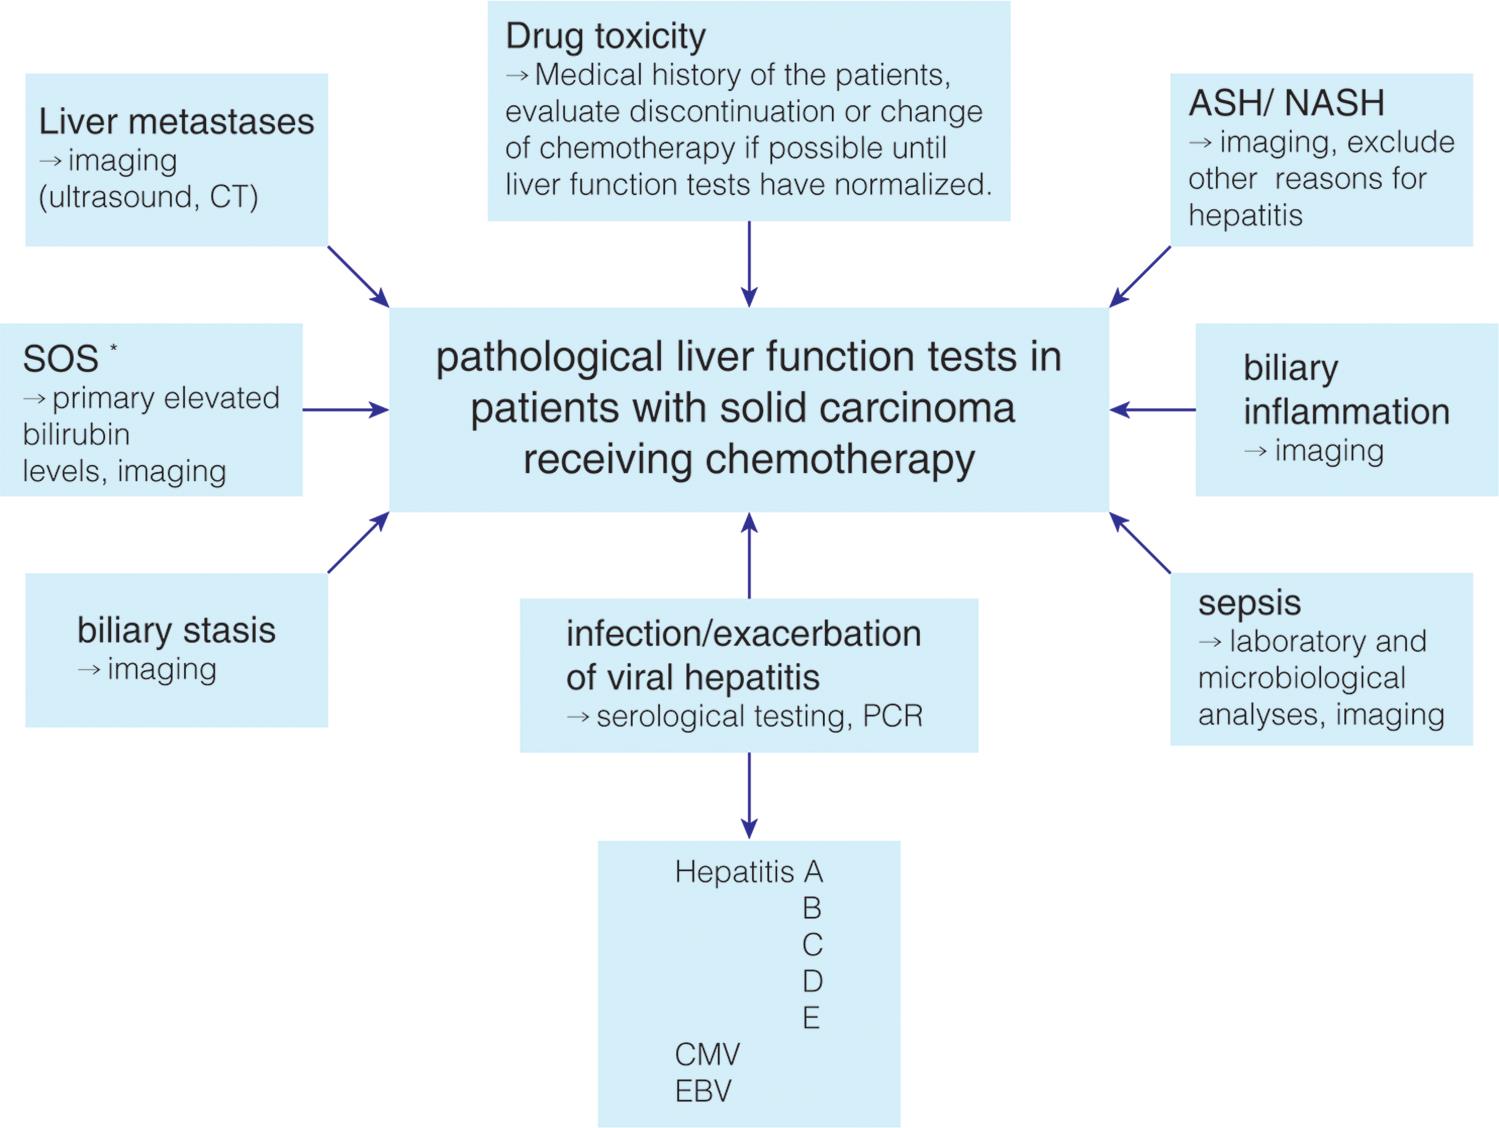 Pathological liver function tests and hepatic adverse events in patients with solid carcinoma receiving chemotherapy.